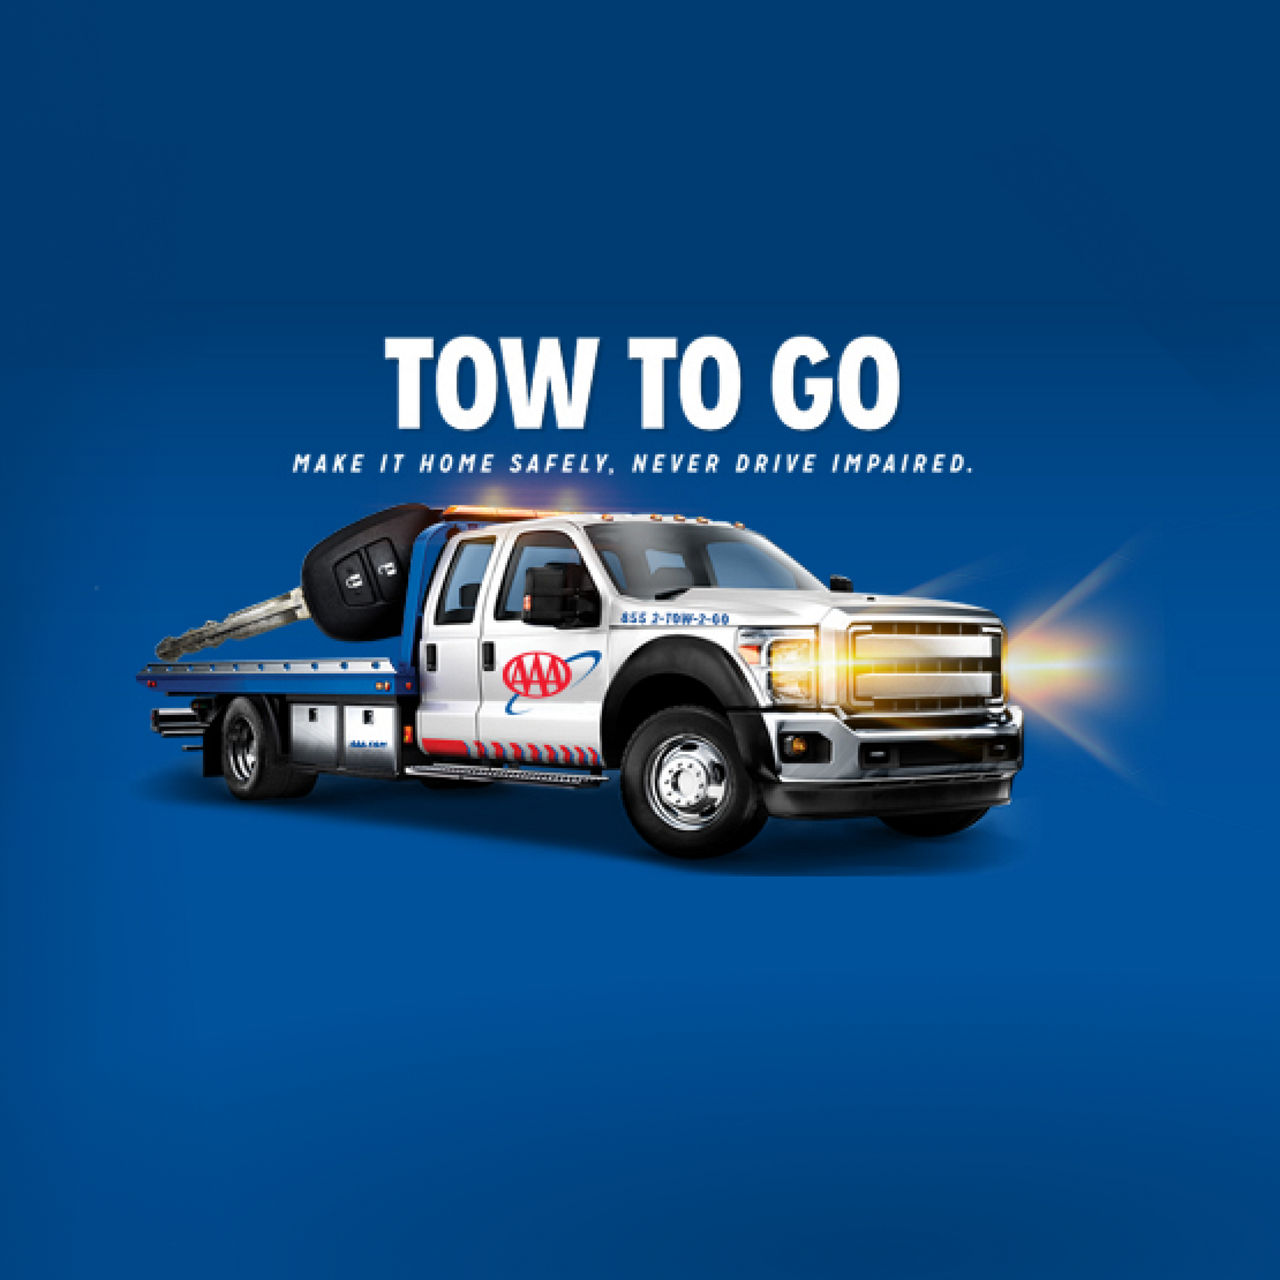 Tow to Go : Make it home safely